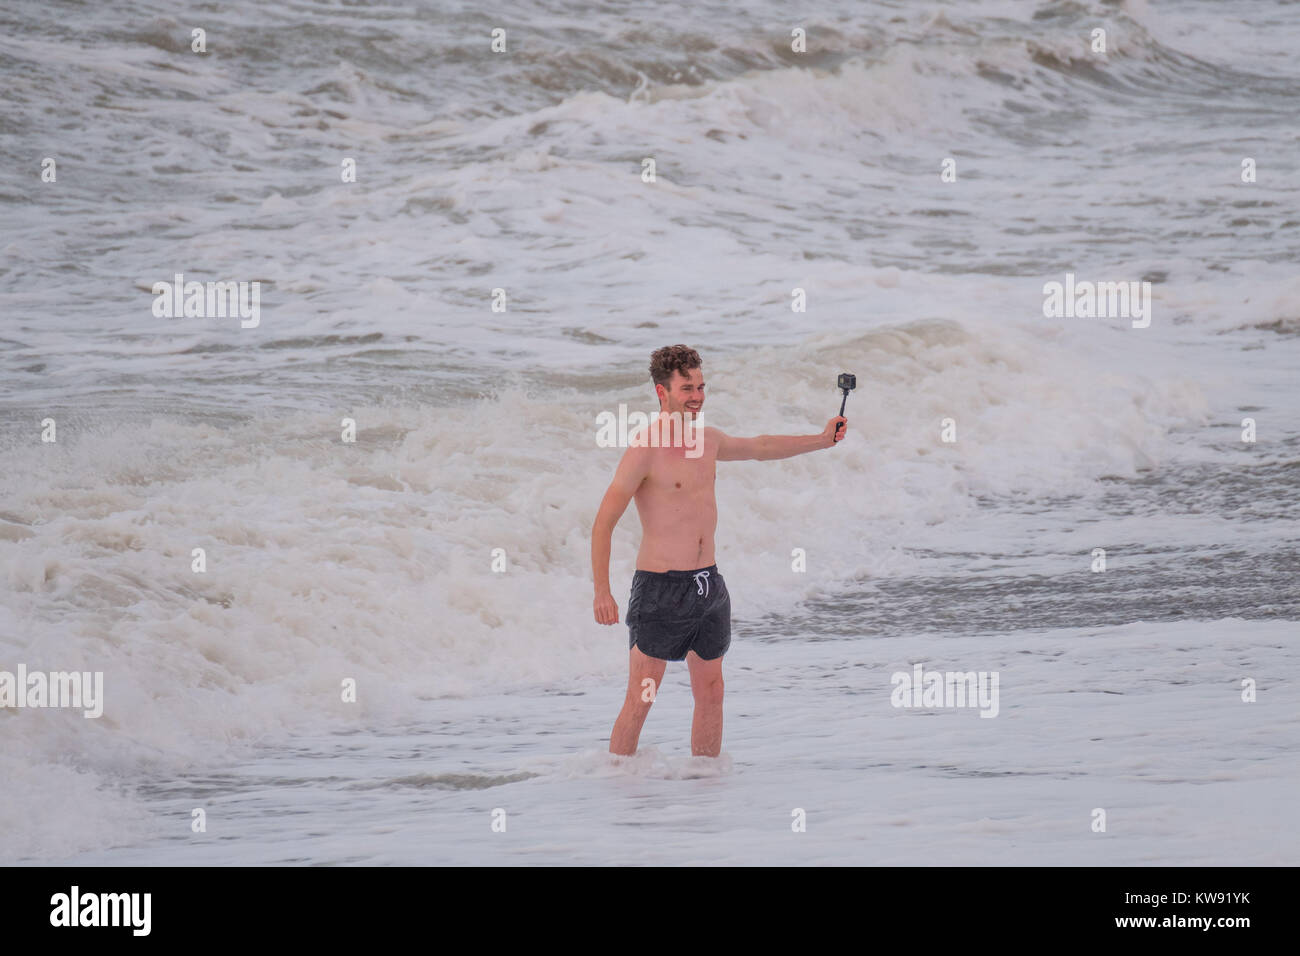 Aberystwyth Wales UK New Years Day, Monday 01 January 2018 UK Weather: On the first day of the New Year, January 1 2018, a man braves the strong winds and the icy cold water in the sea in Aberystwyth to take a selfie. The weather is set to deteriorate over the next 48 hours, with winds gusting in excess of 50mph on Tuesday night and Wednesday morning photo Credit: Keith Morris/Alamy Live News Stock Photo